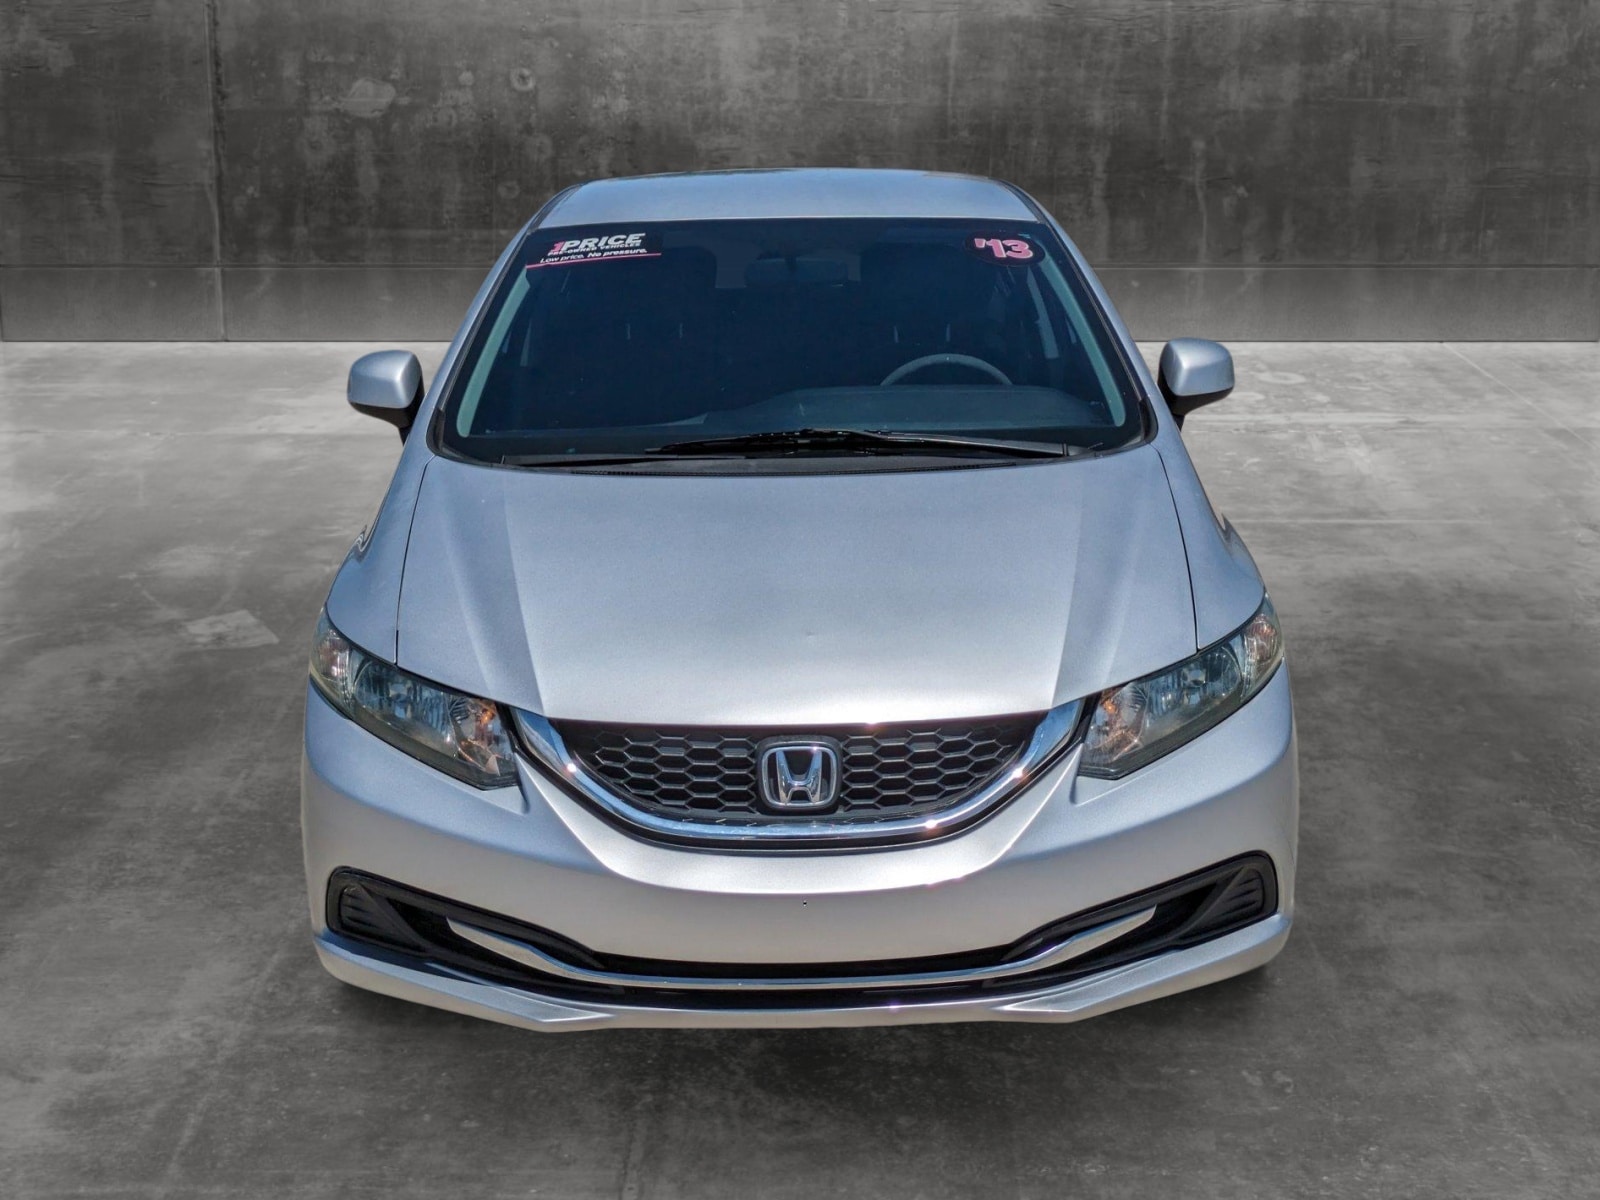 Used 2013 Honda Civic LX with VIN 19XFB2F51DE217427 for sale in Las Vegas, NV